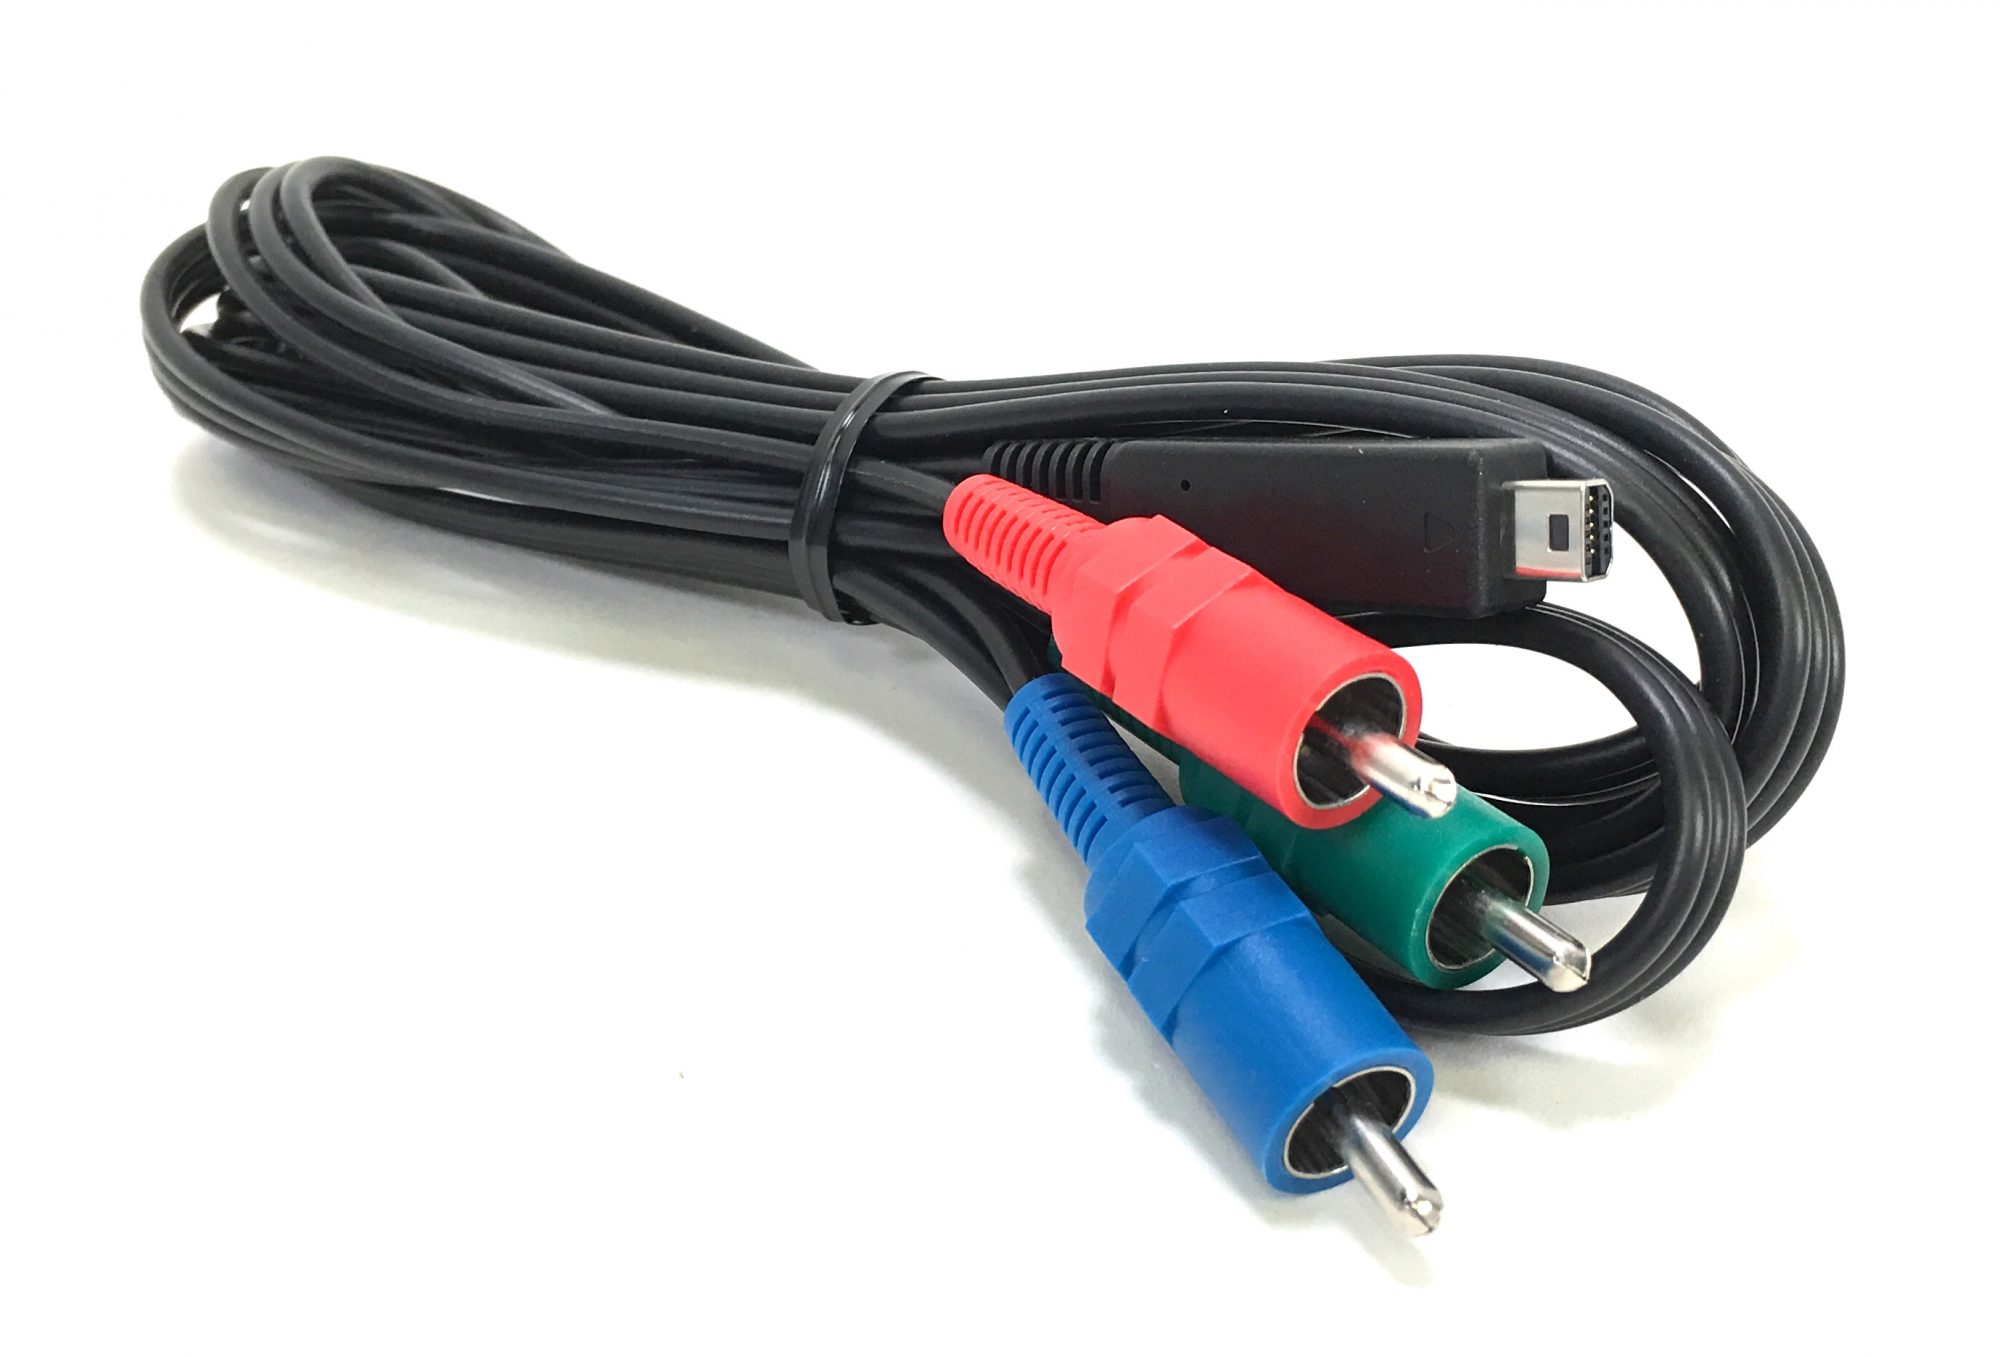 Original Component Video Cable that came with the Sony HDR-FX1 camcorder. It is a genuine Sony part, sourced directly from Sony USA. Brand new factory fresh. Free Shipping.